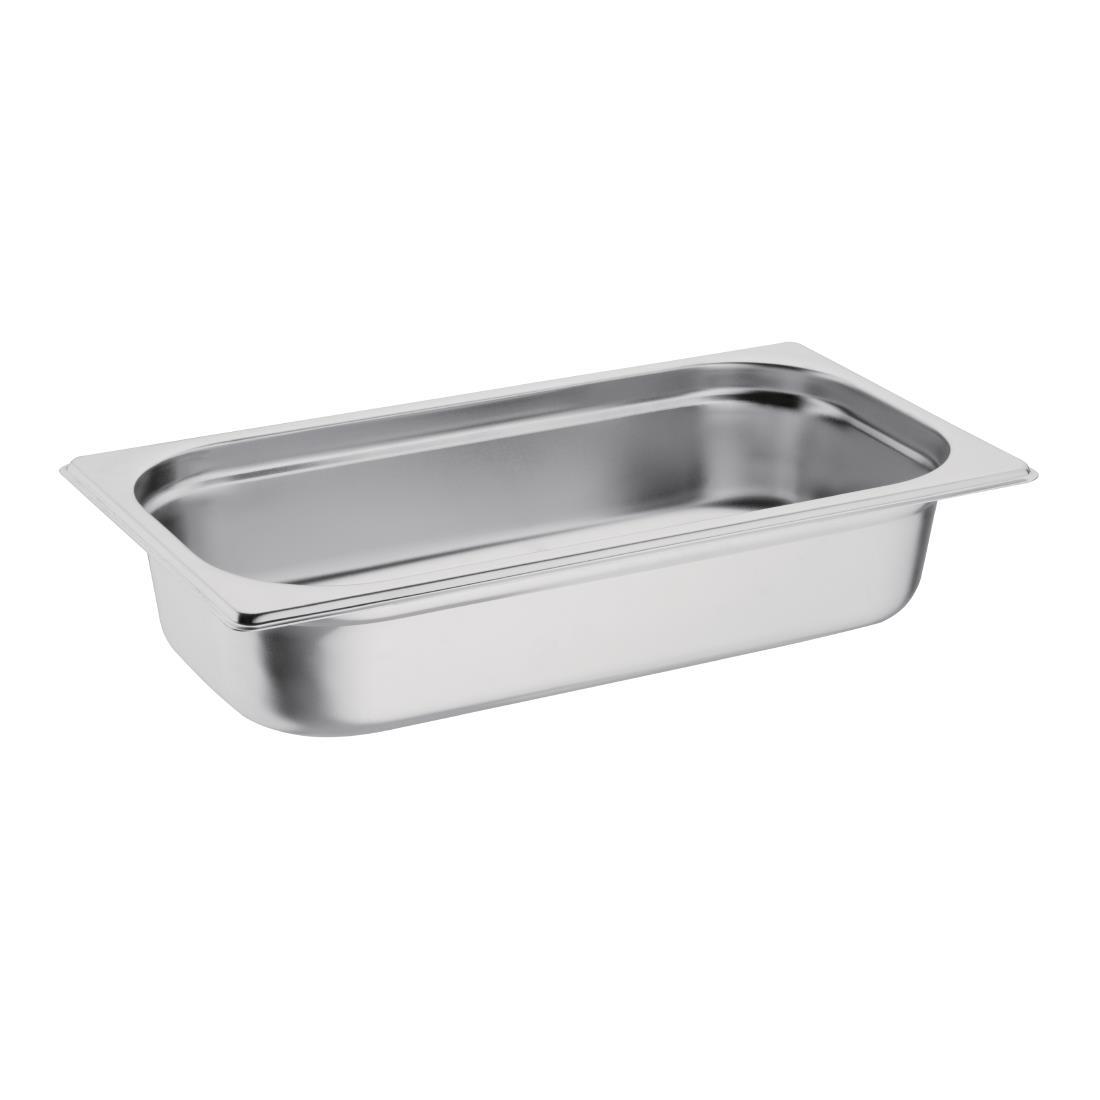 Vogue Stainless Steel 1/3 Gastronorm Pan 65mm - K929  - 1